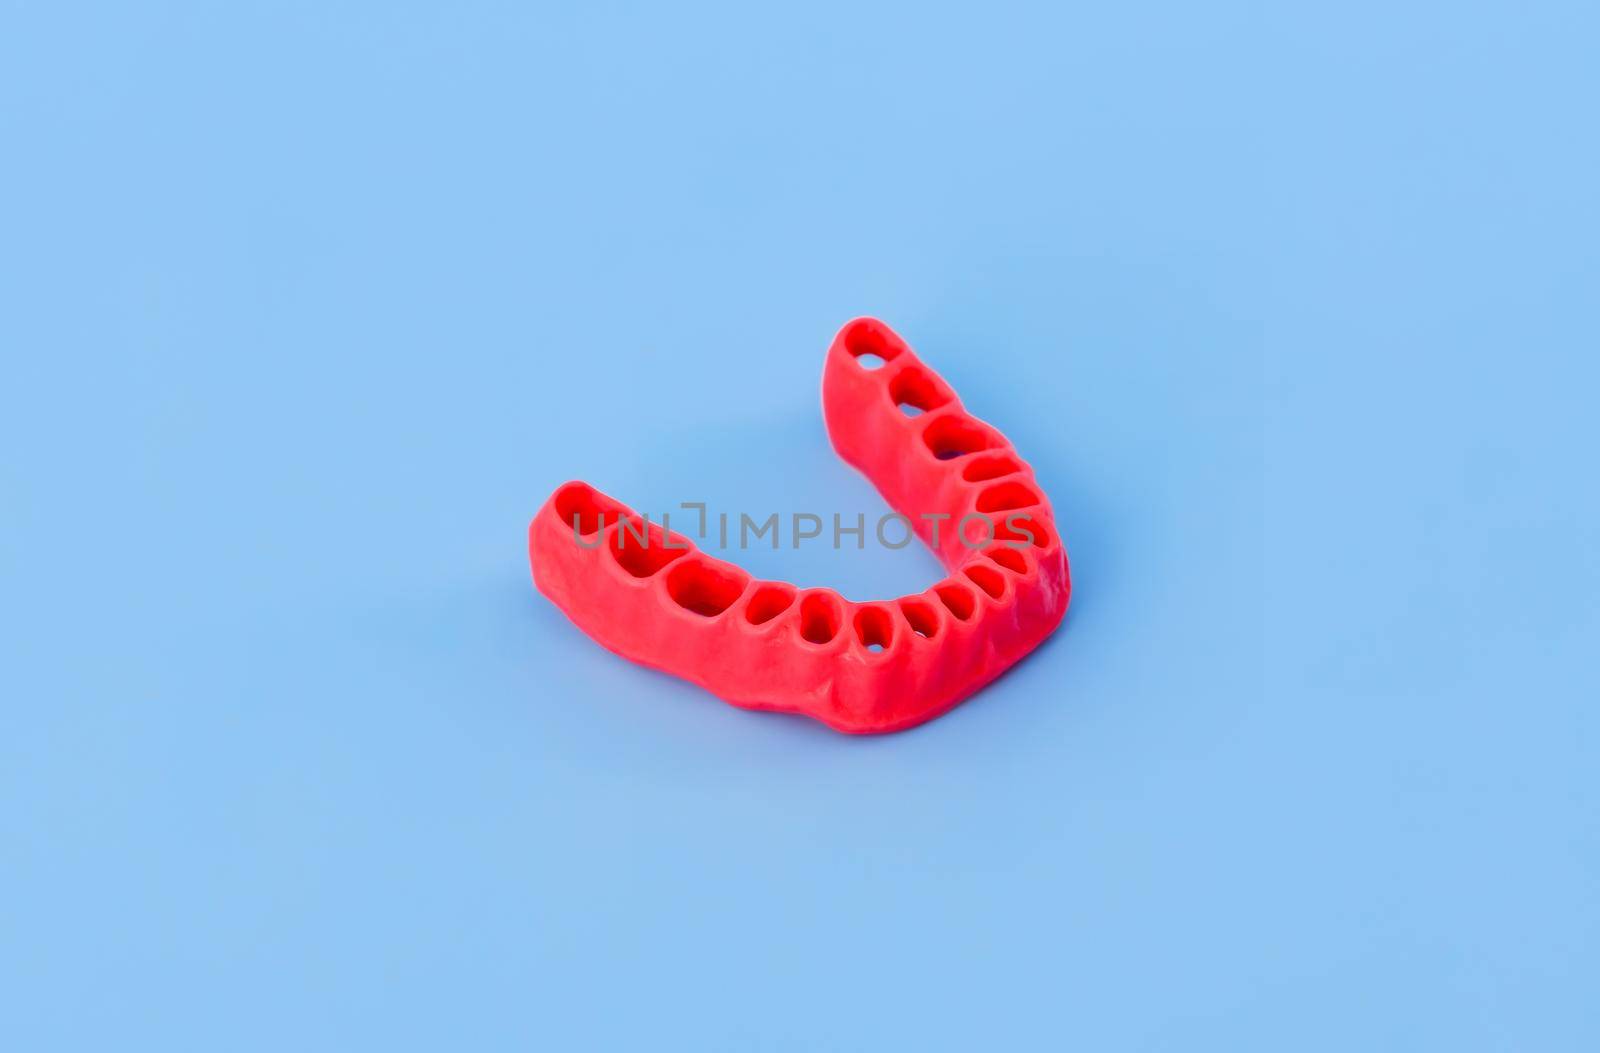 human gums without teeth model medical illustration isolated on blue background. Healthy teeth, dental care and orthodontic concept